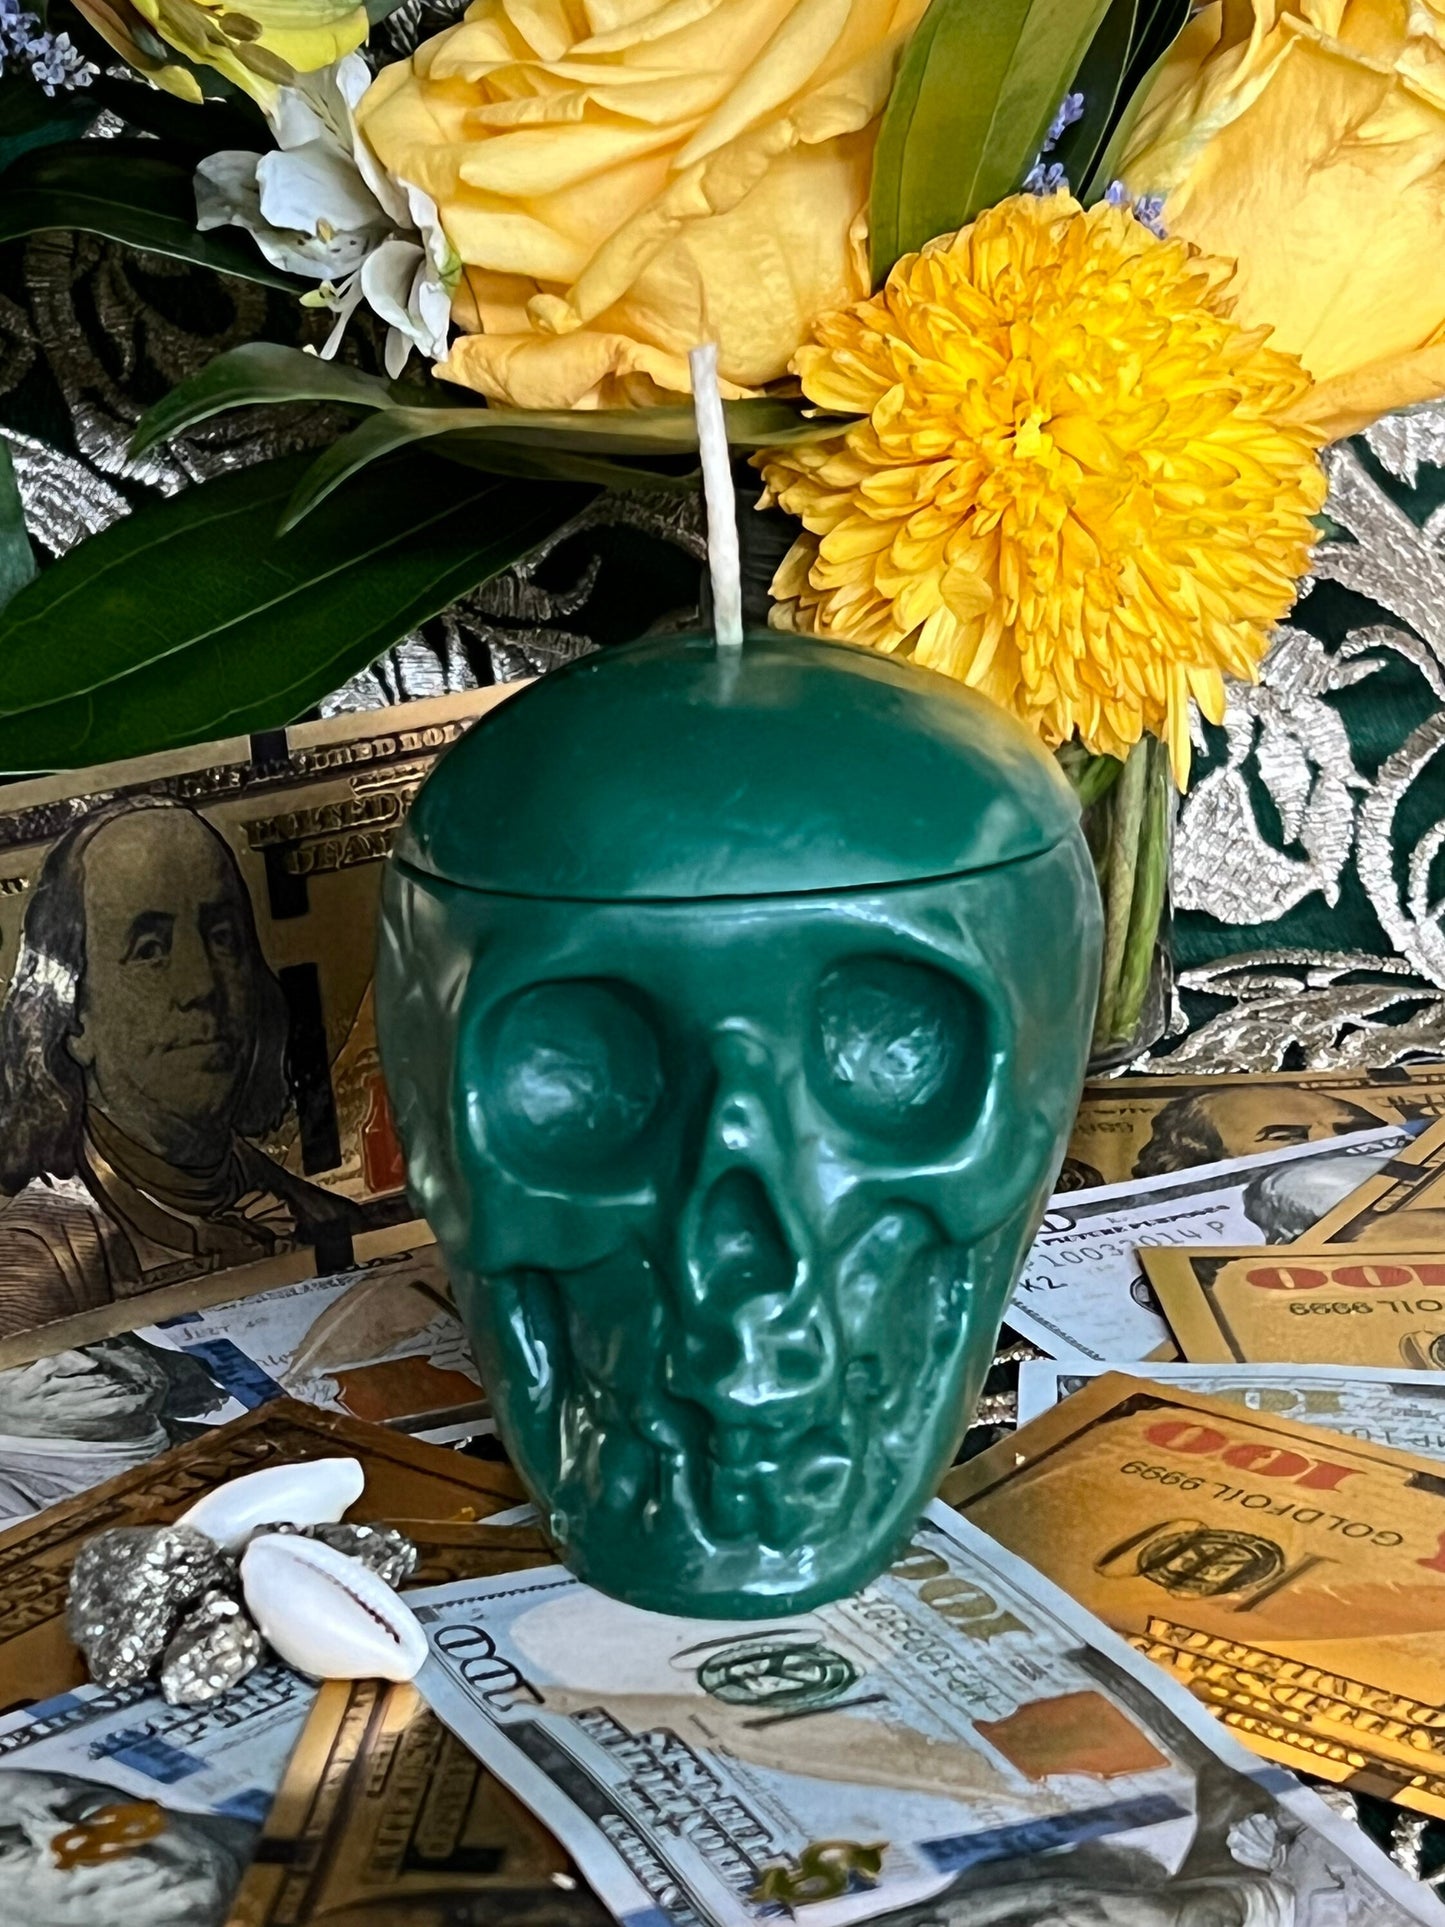 Loadable Skull Candle + Influence Thoughts + Hoodoo + Voodoo + Conjure